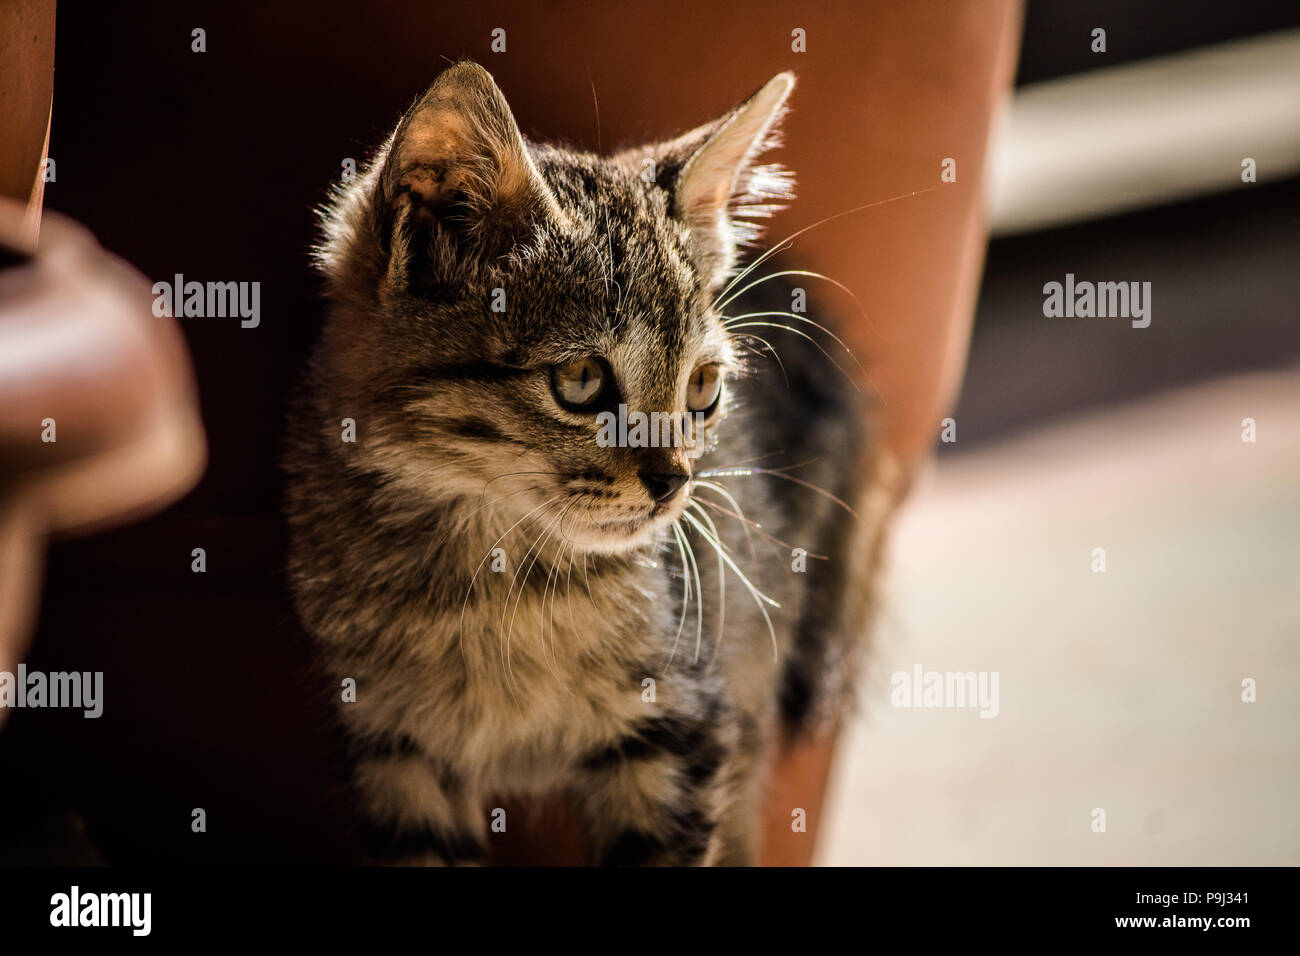 Best Cat Photo For Stock Use Stock Photo